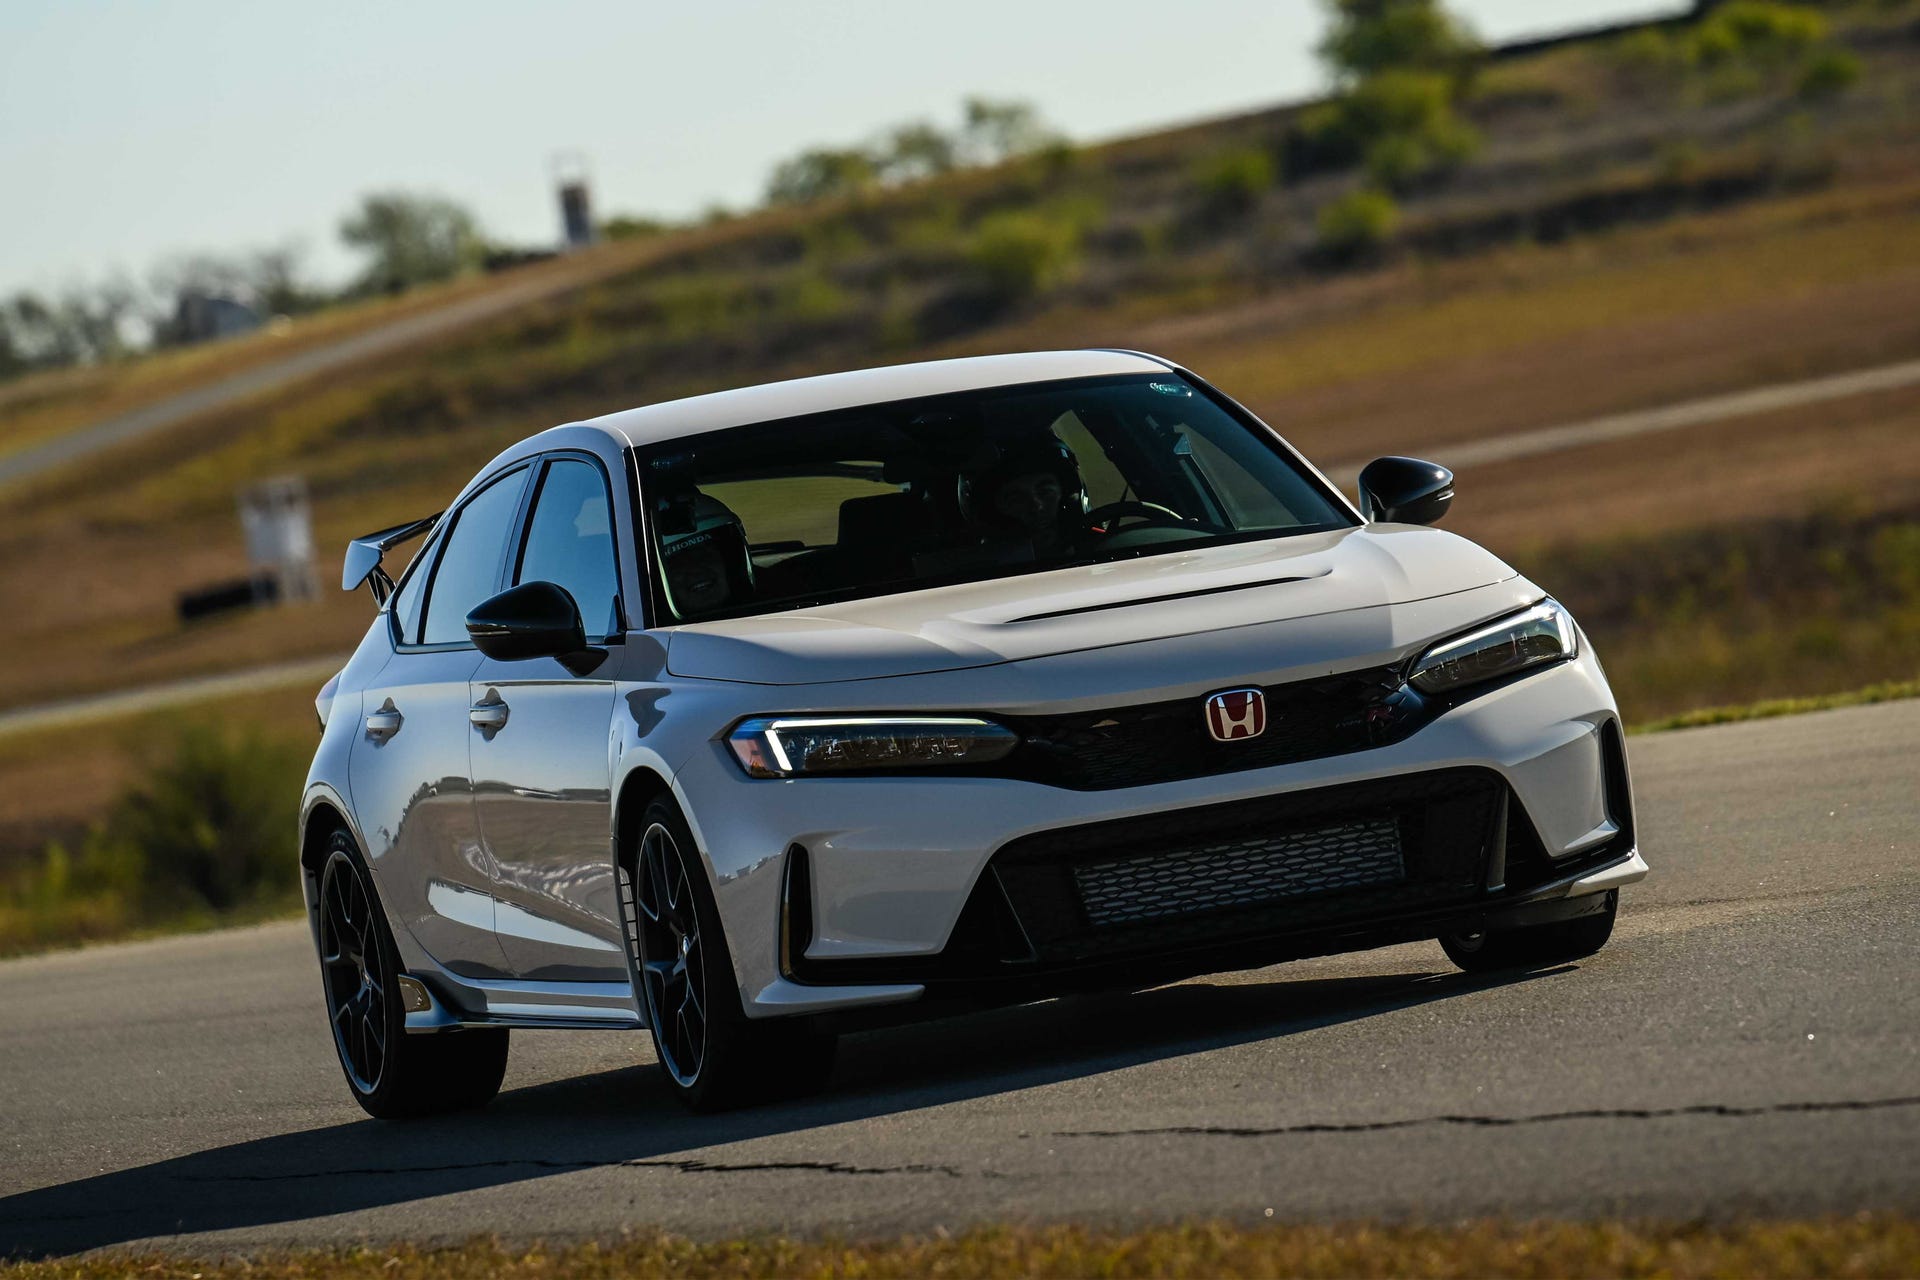 Honda Civic Type R First Drive Review: The Hooligan Grows Up